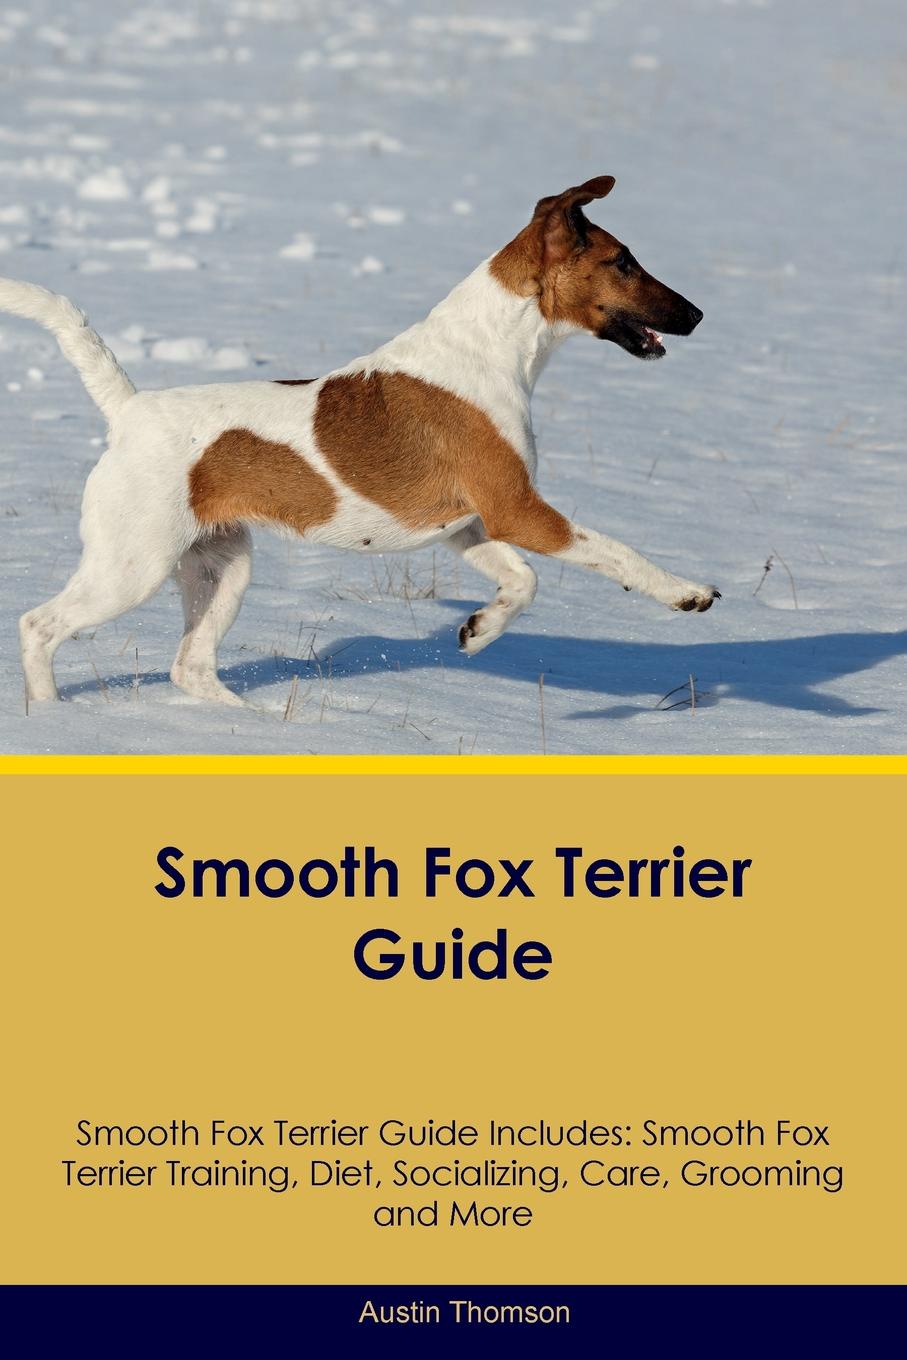 Smooth Fox Terrier Guide Smooth Fox Terrier Guide Includes. Smooth Fox Terrier Training, Diet, Socializing, Care, Grooming, Breeding and More